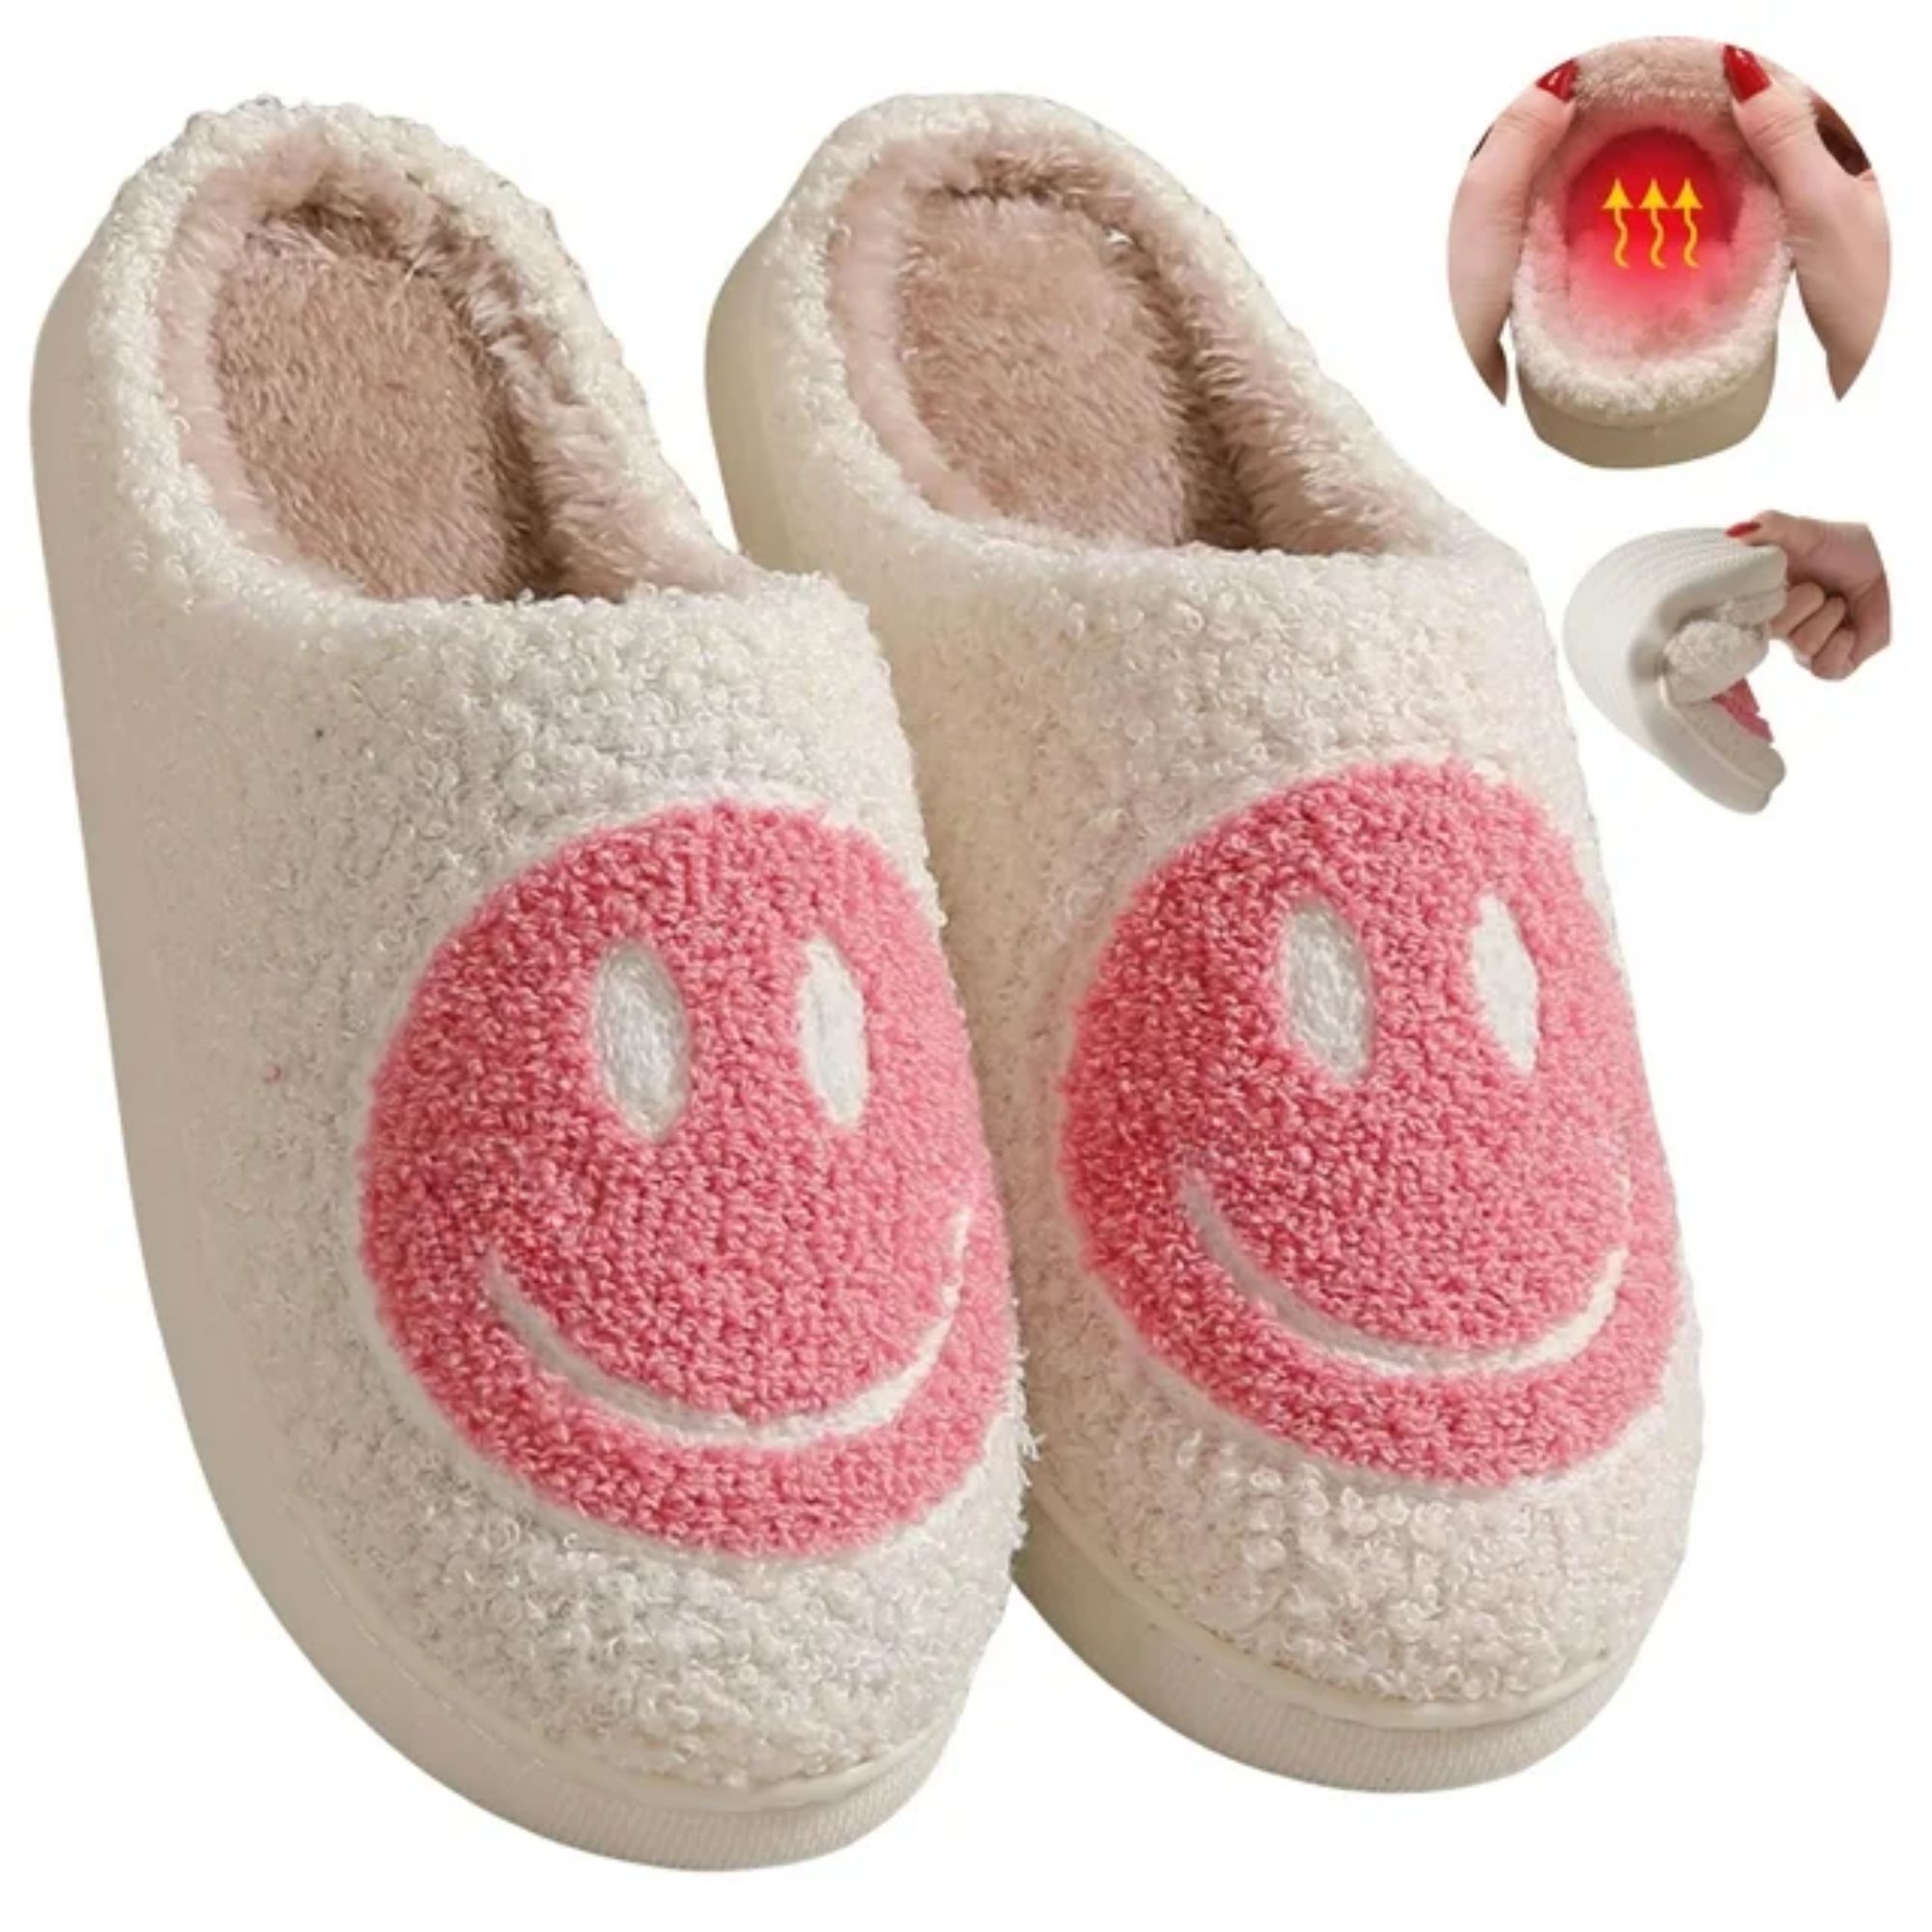 BERANMEY Cute Smile Face Slippers for Women Perfect Soft Plush Comfy Warm Slip-On Happy Face Slippers fo Women Indoor fluffy Smile House Slippers for Women and Men Non-slip Fuzzy Flat Slides - image 1 of 7